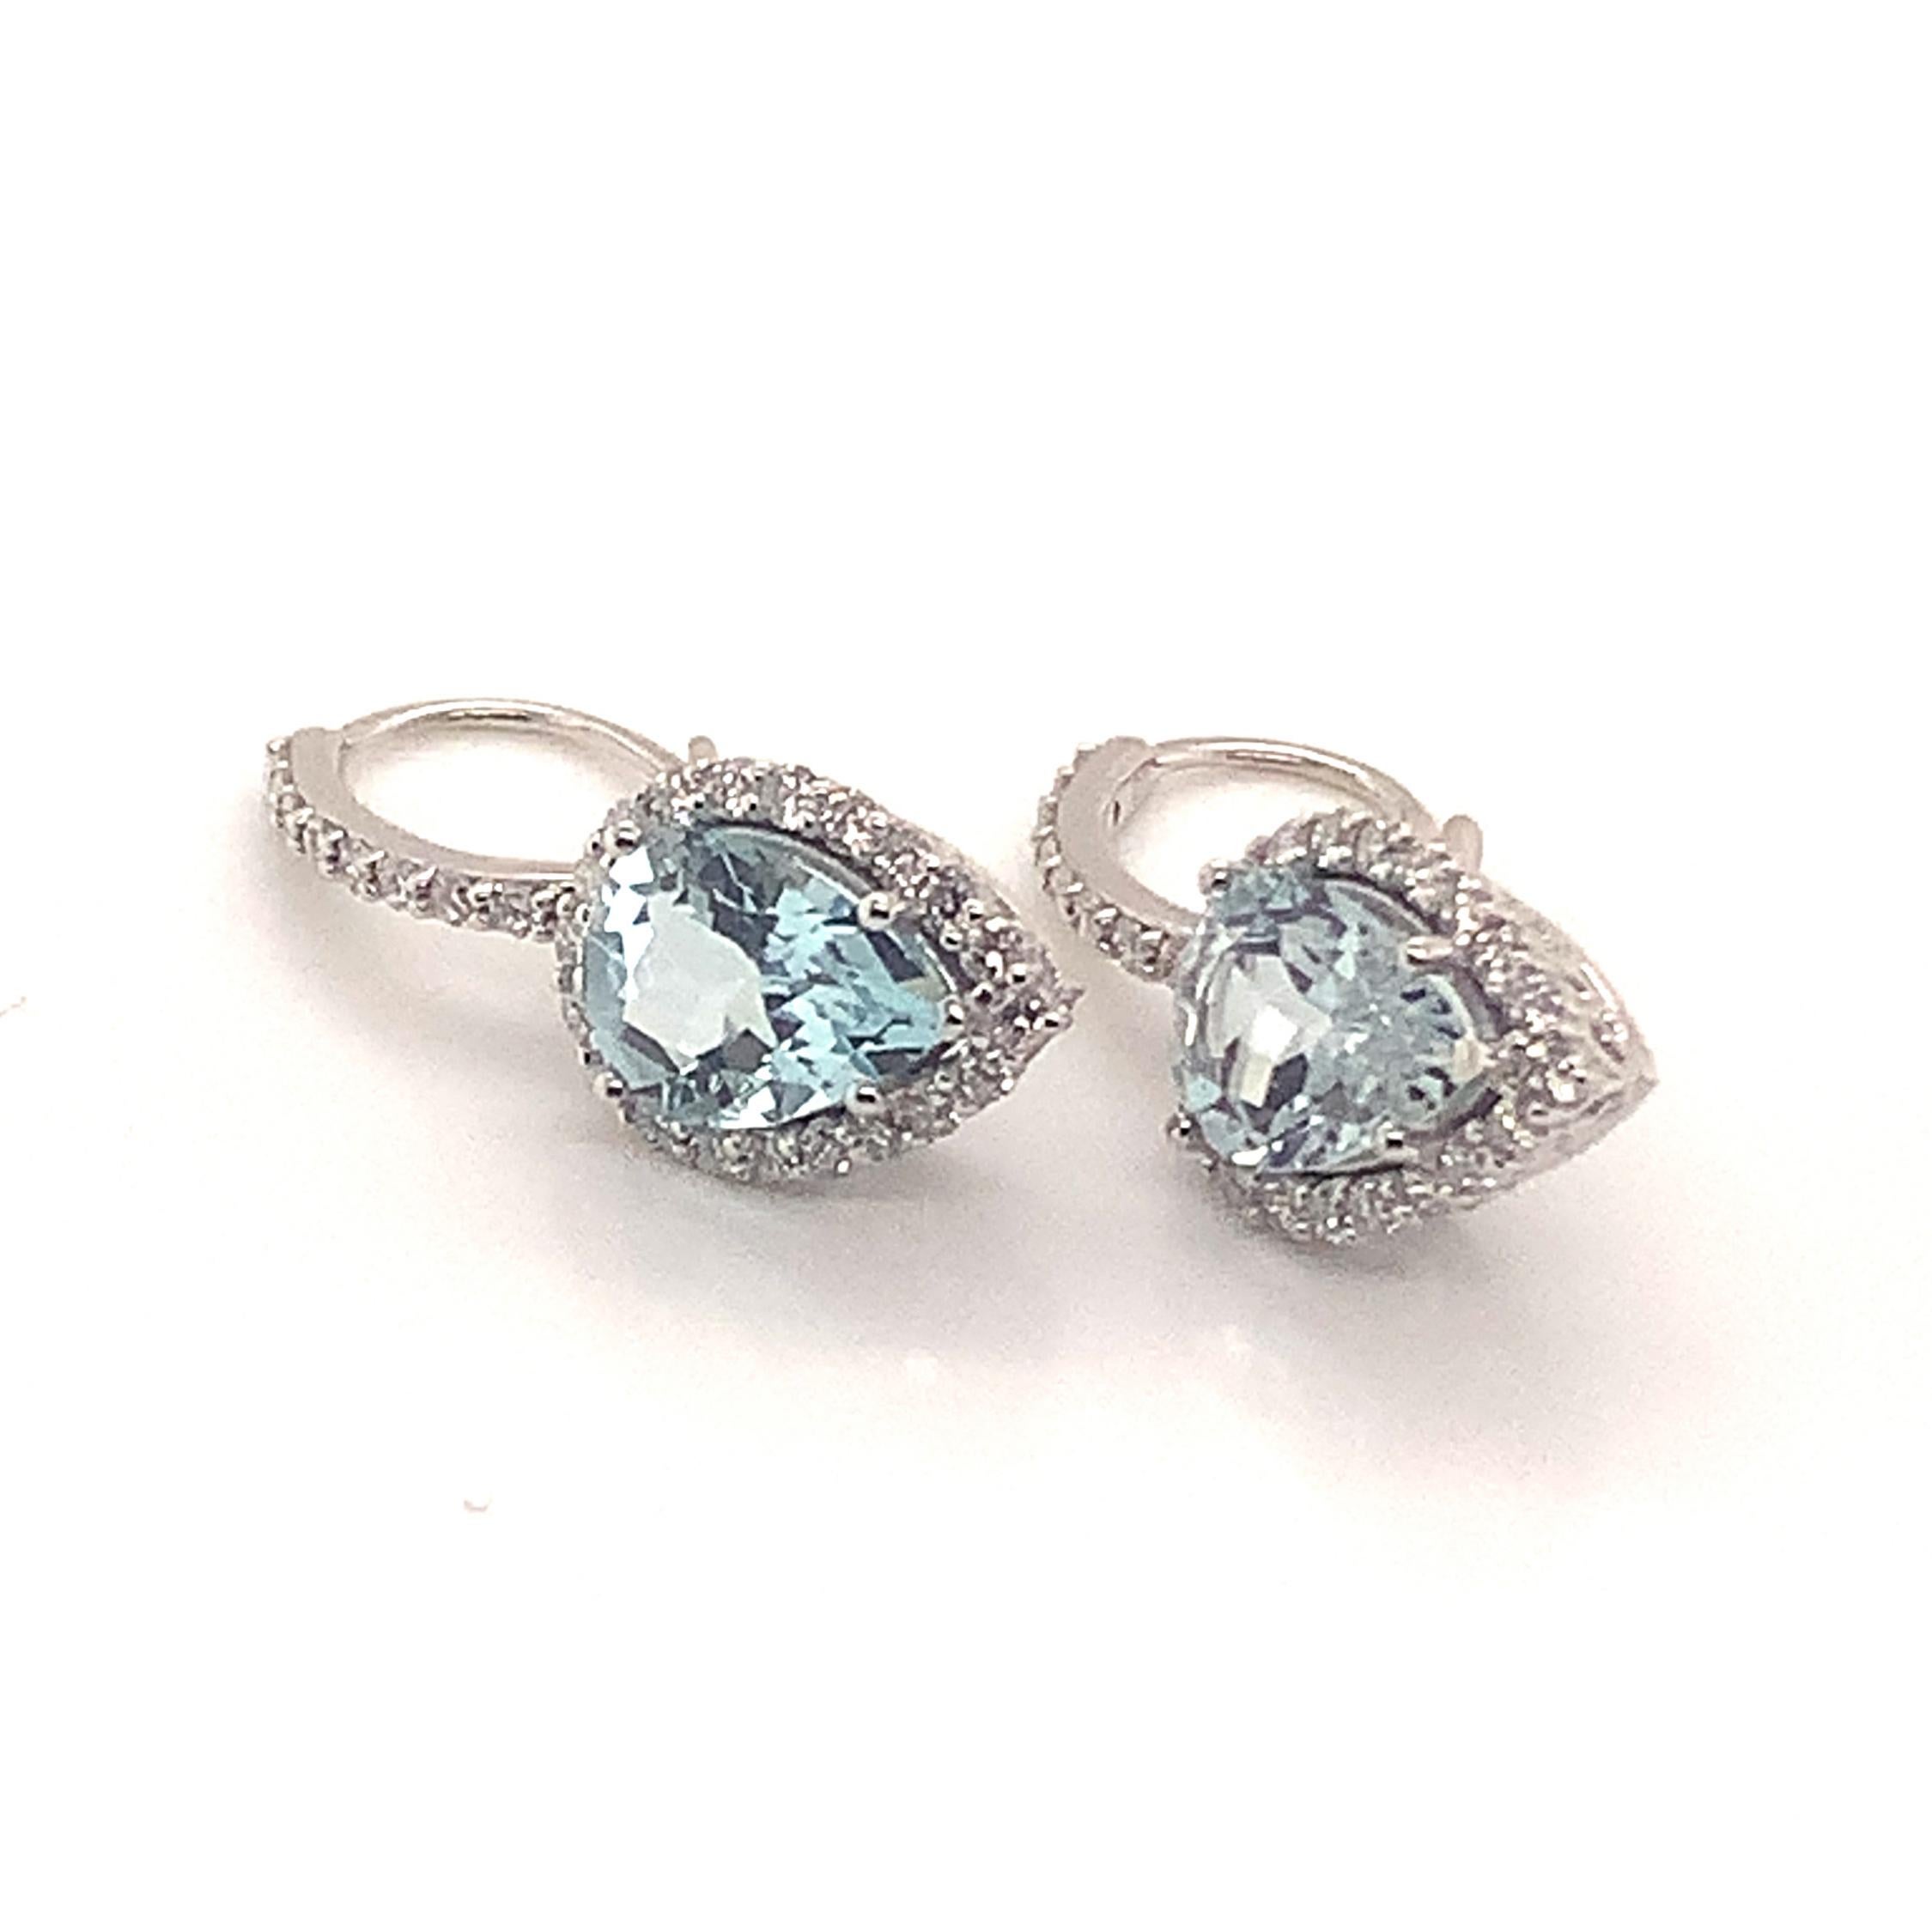 Natural Aquamarine Diamond Earrings 14k Gold 3.61 Tcw Certified For Sale 2